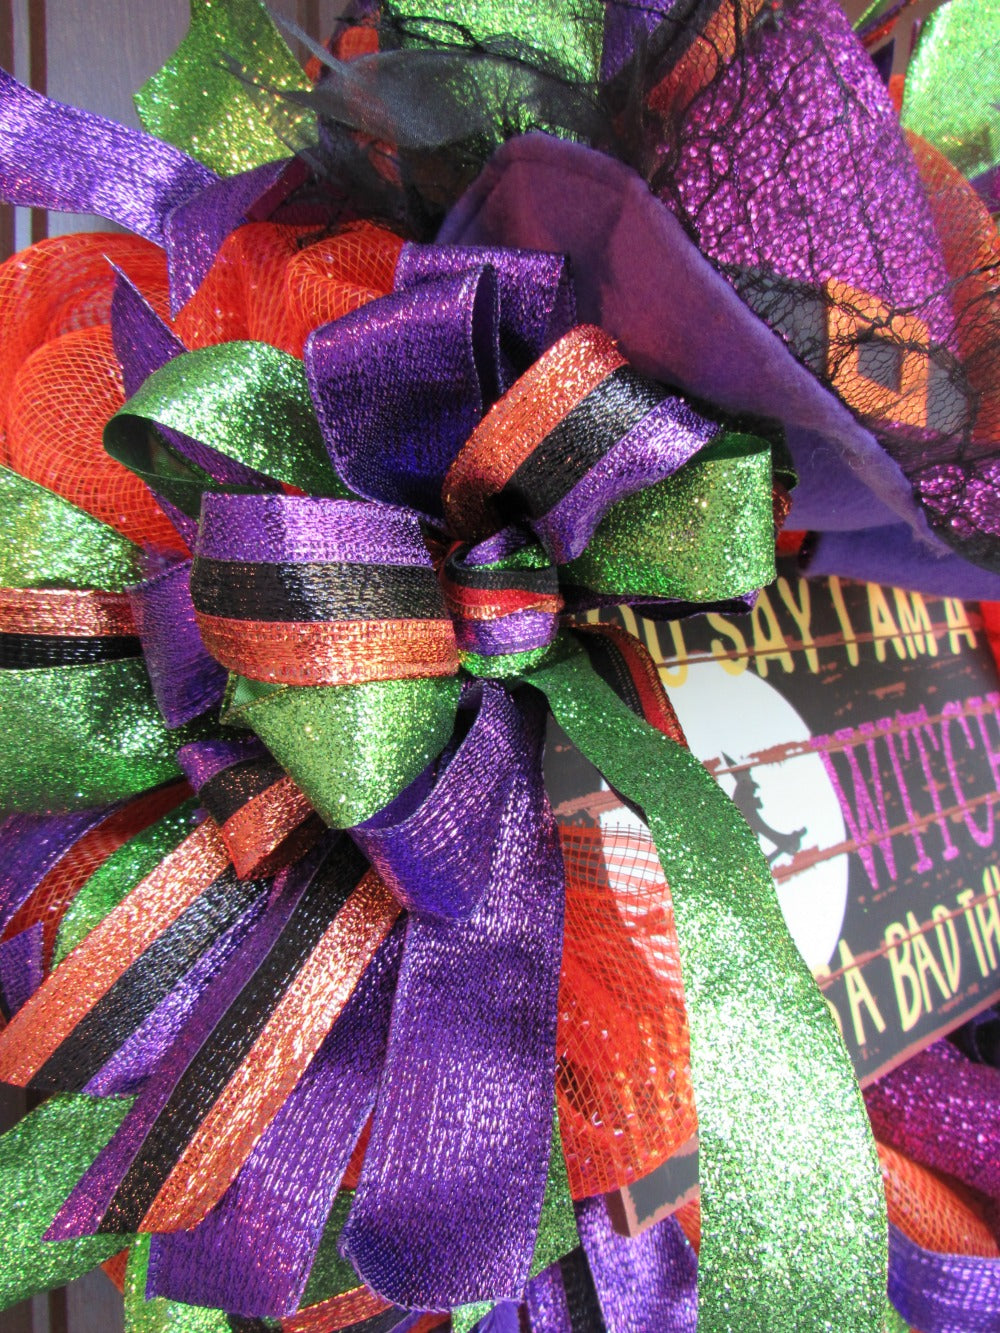 2017 witch hat sign foot wreath close-up